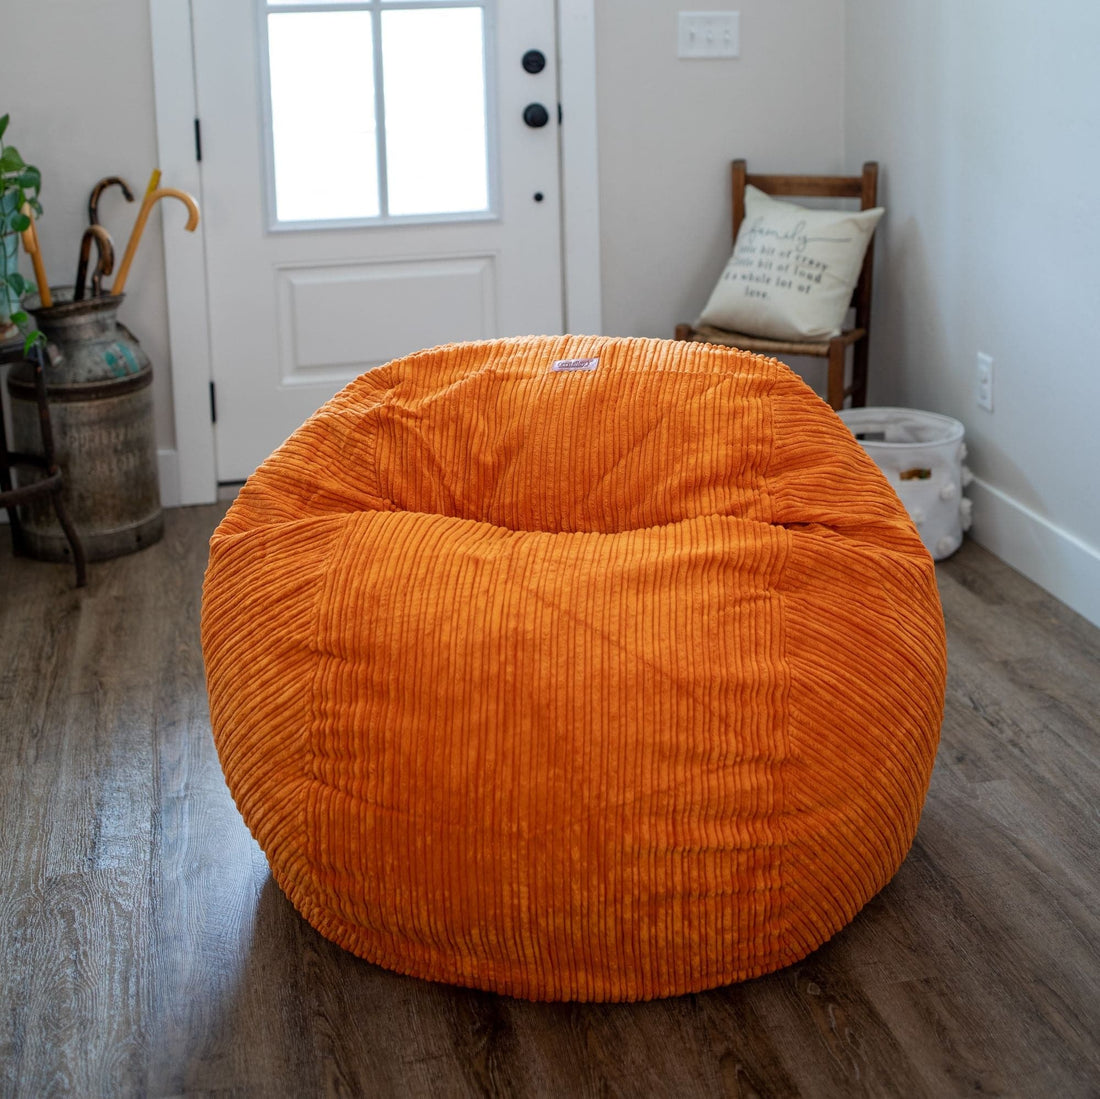 4' Bean Bag Chair With Memory Foam Filling And Washable Cover Orange -  Relax Sacks : Target